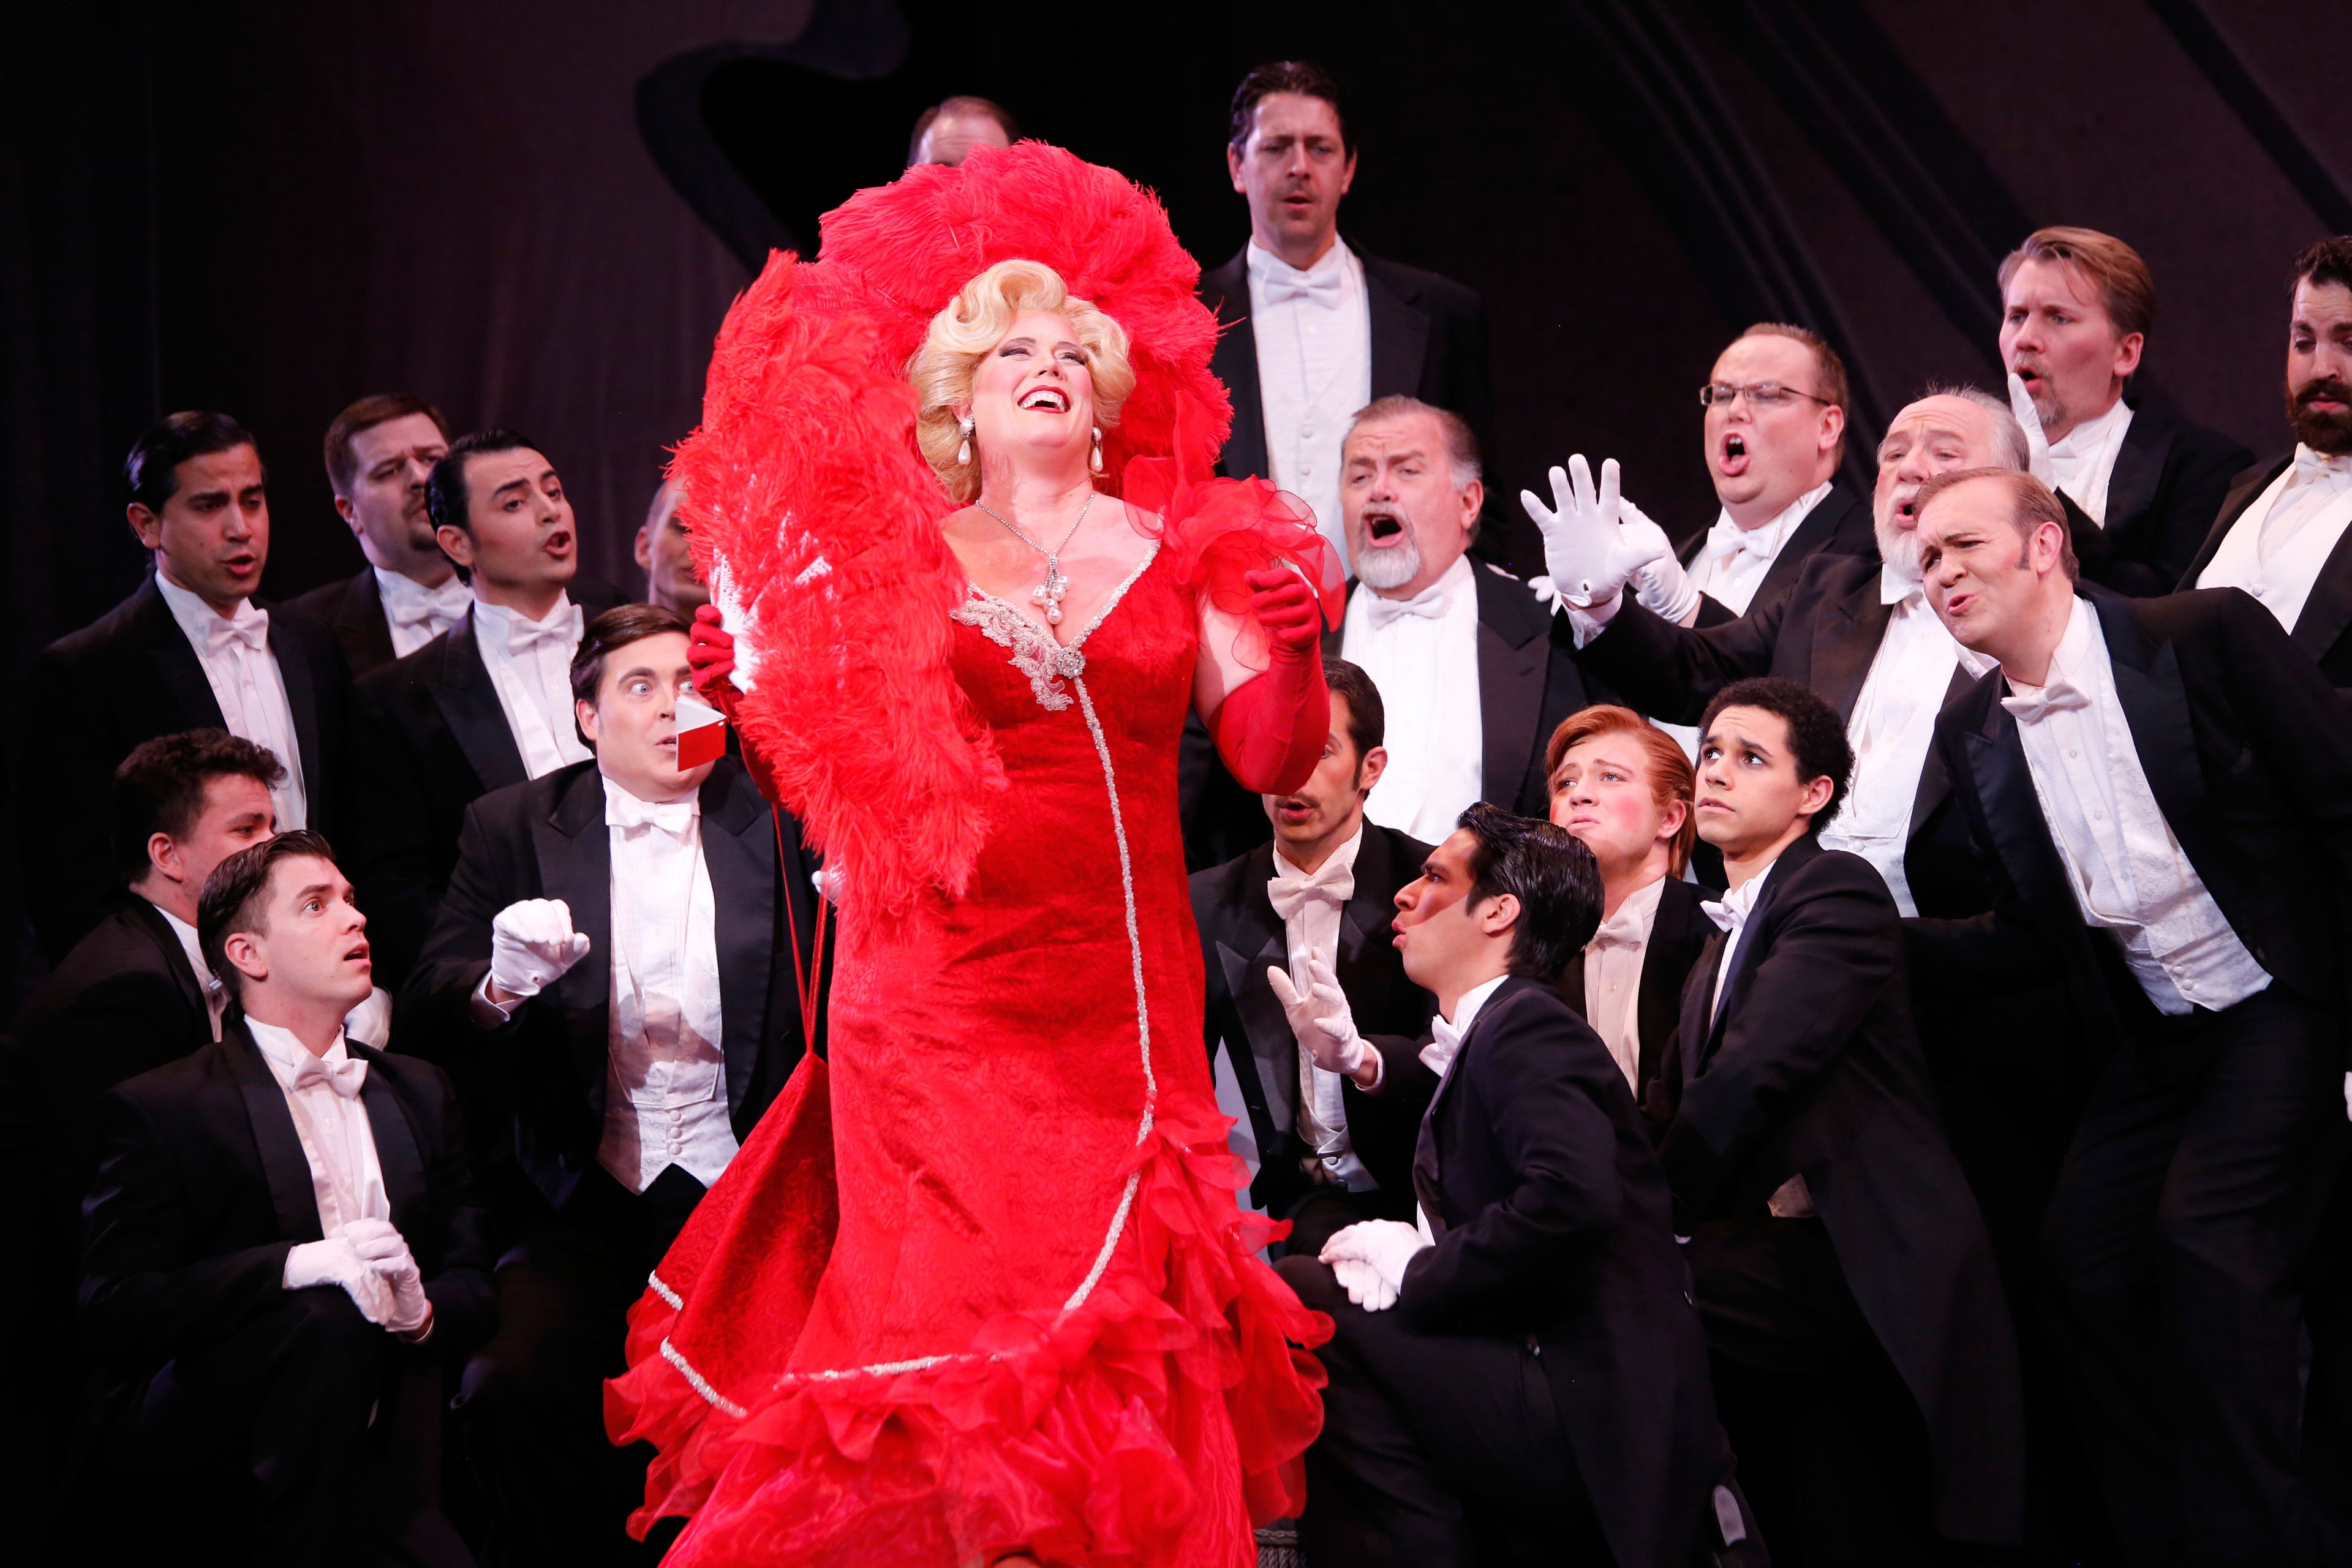 The Merry Widow has been well-received by audiences around the world. © Kent Miles